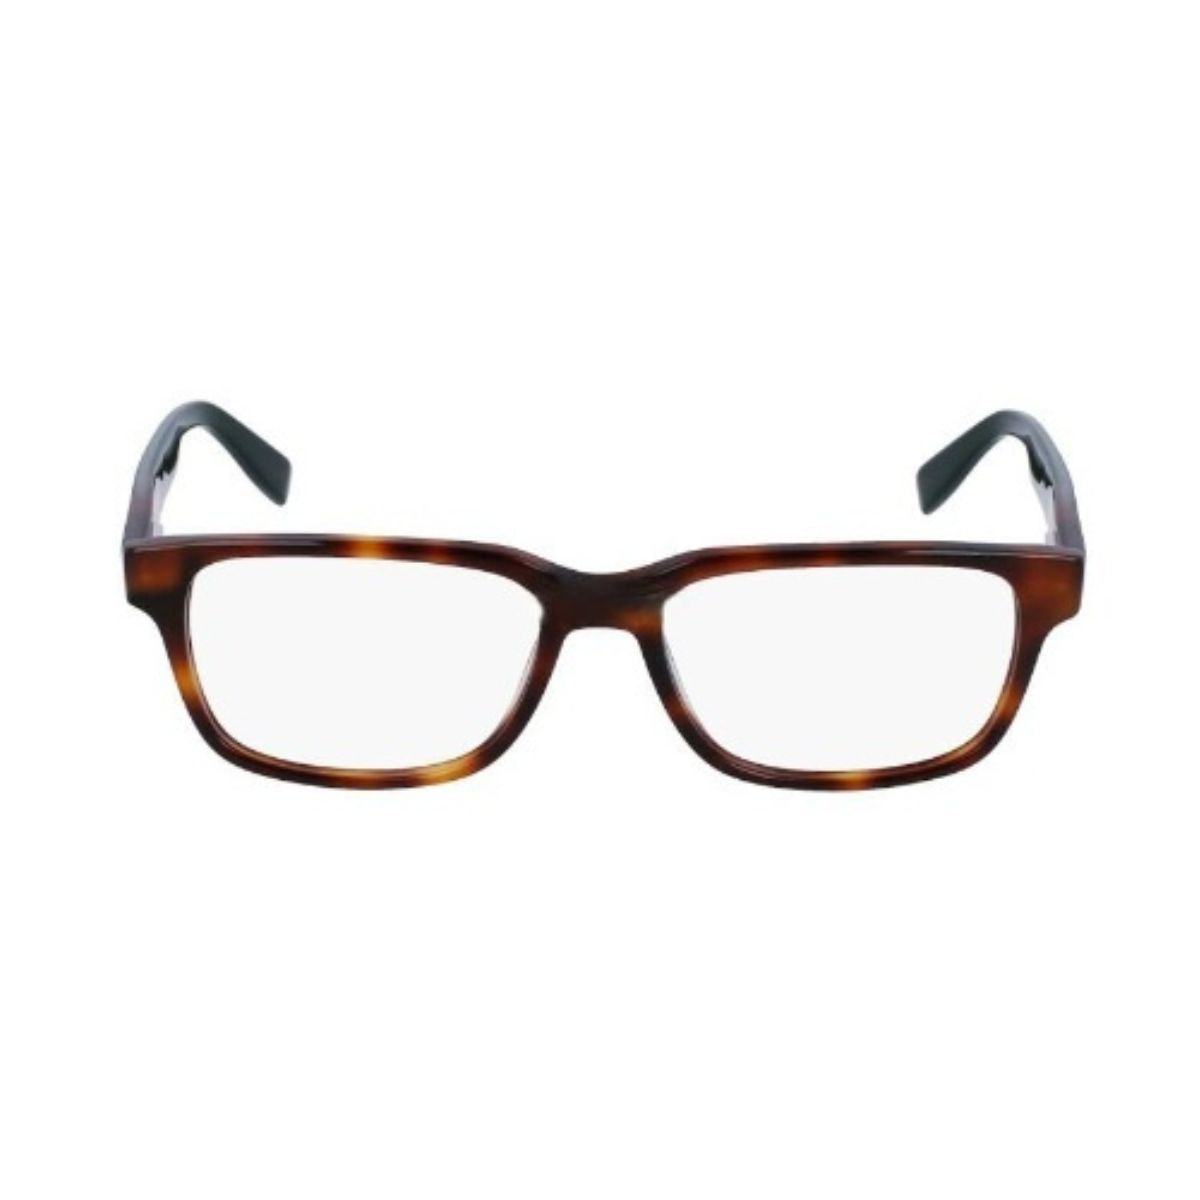 "buy Lacoste 2910 240 square frame for men and women online at optorium"